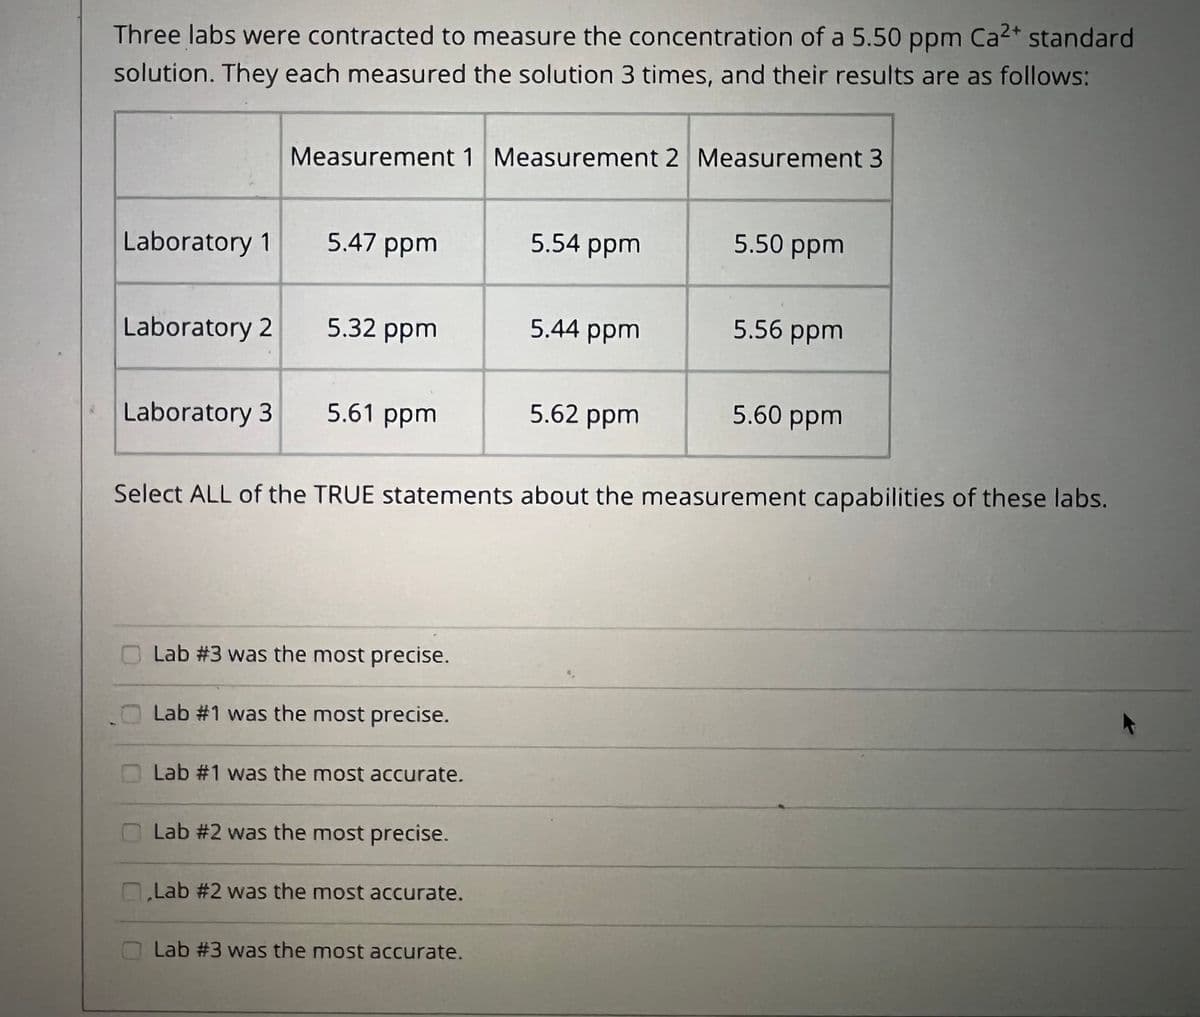 Three labs were contracted to measure the concentration of a 5.50 ppm Ca2* standard
solution. They each measured the solution 3 times, and their results are as follows:
Measurement 1 Measurement 2 Measurement 3
Laboratory 1
5.47 ppm
5.54 ppm
5.50 ppm
Laboratory 2
5.32 ppm
5.44 ppm
5.56 ppm
Laboratory 3
5.61 ppm
5.62 ppm
5.60 ppm
Select ALL of the TRUE statements about the measurement capabilities of these labs.
Lab #3 was the most precise.
Lab #1 was the most precise.
Lab #1 was the most accurate.
Lab #2 was the most precise.
O.Lab #2 was the most accurate.
Lab #3 was the most accurate.
